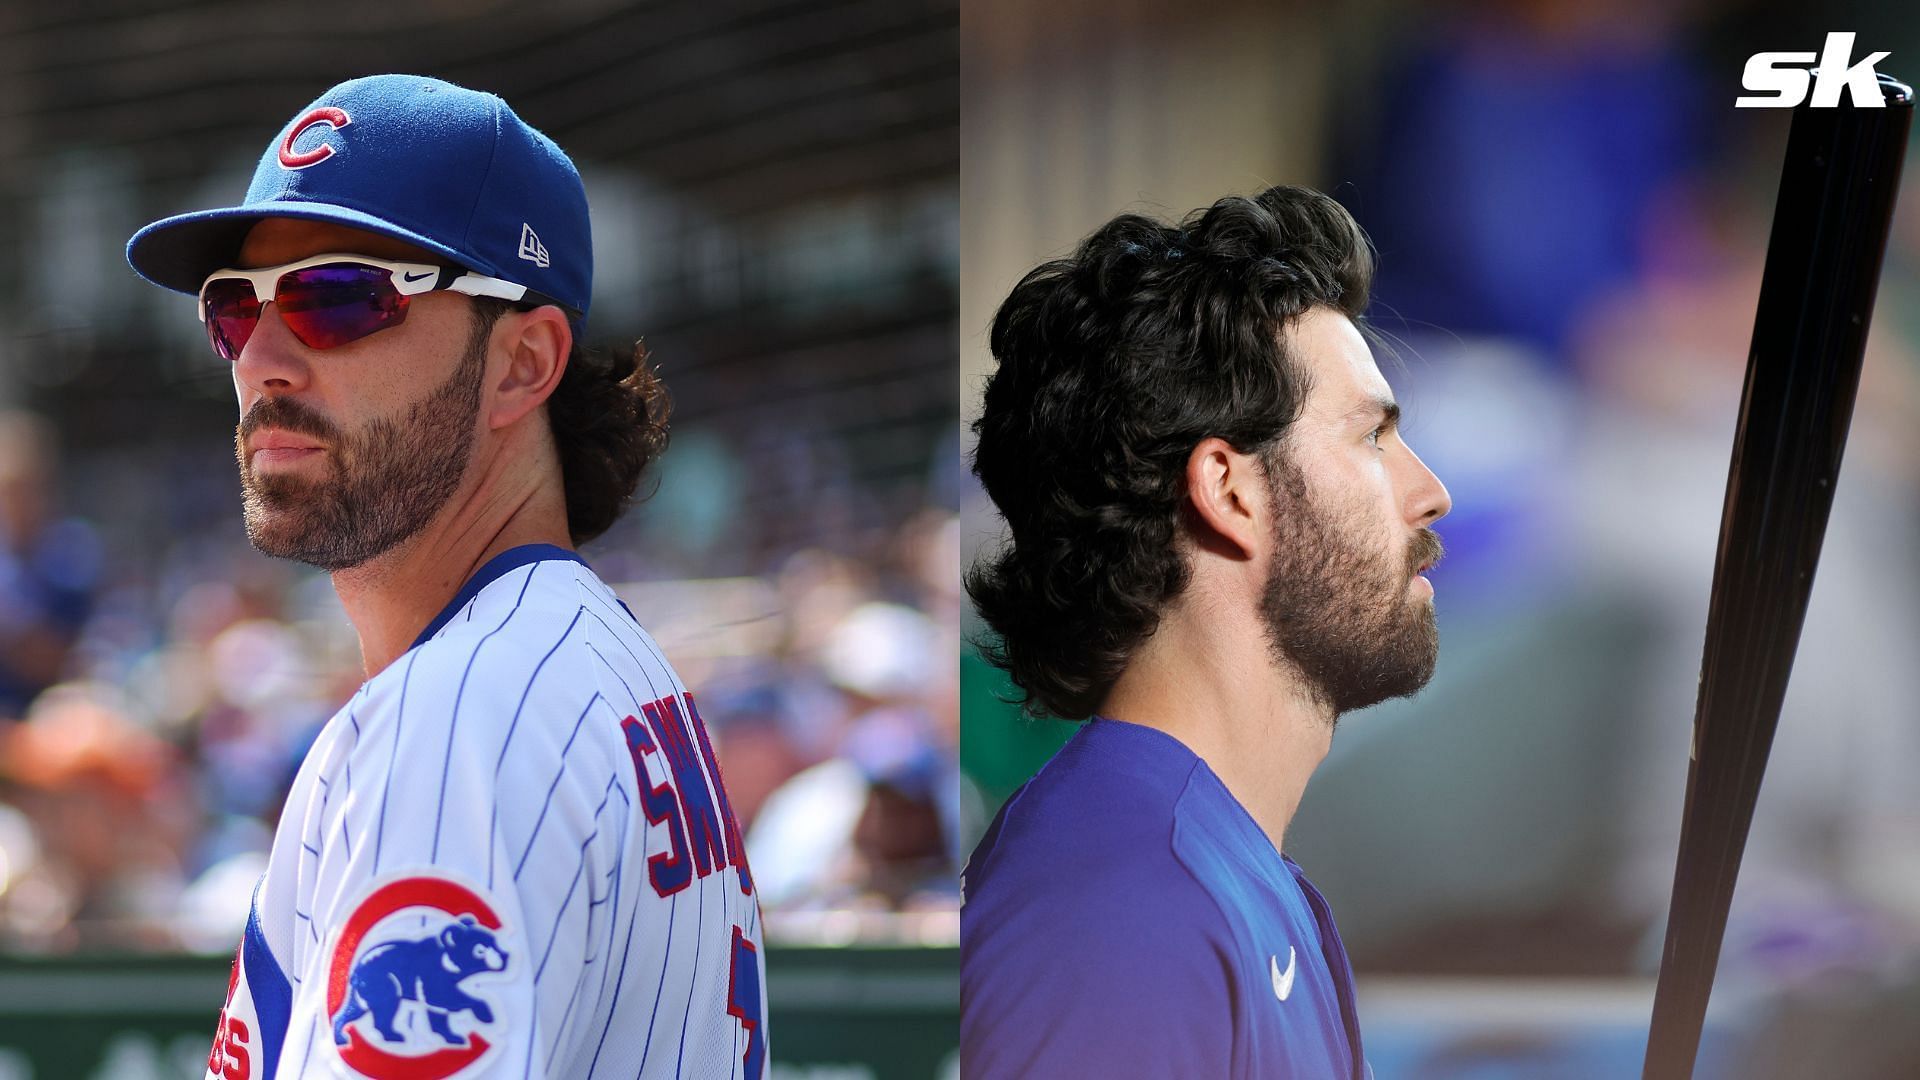 Dansby Swanson of the Chicago Cubs